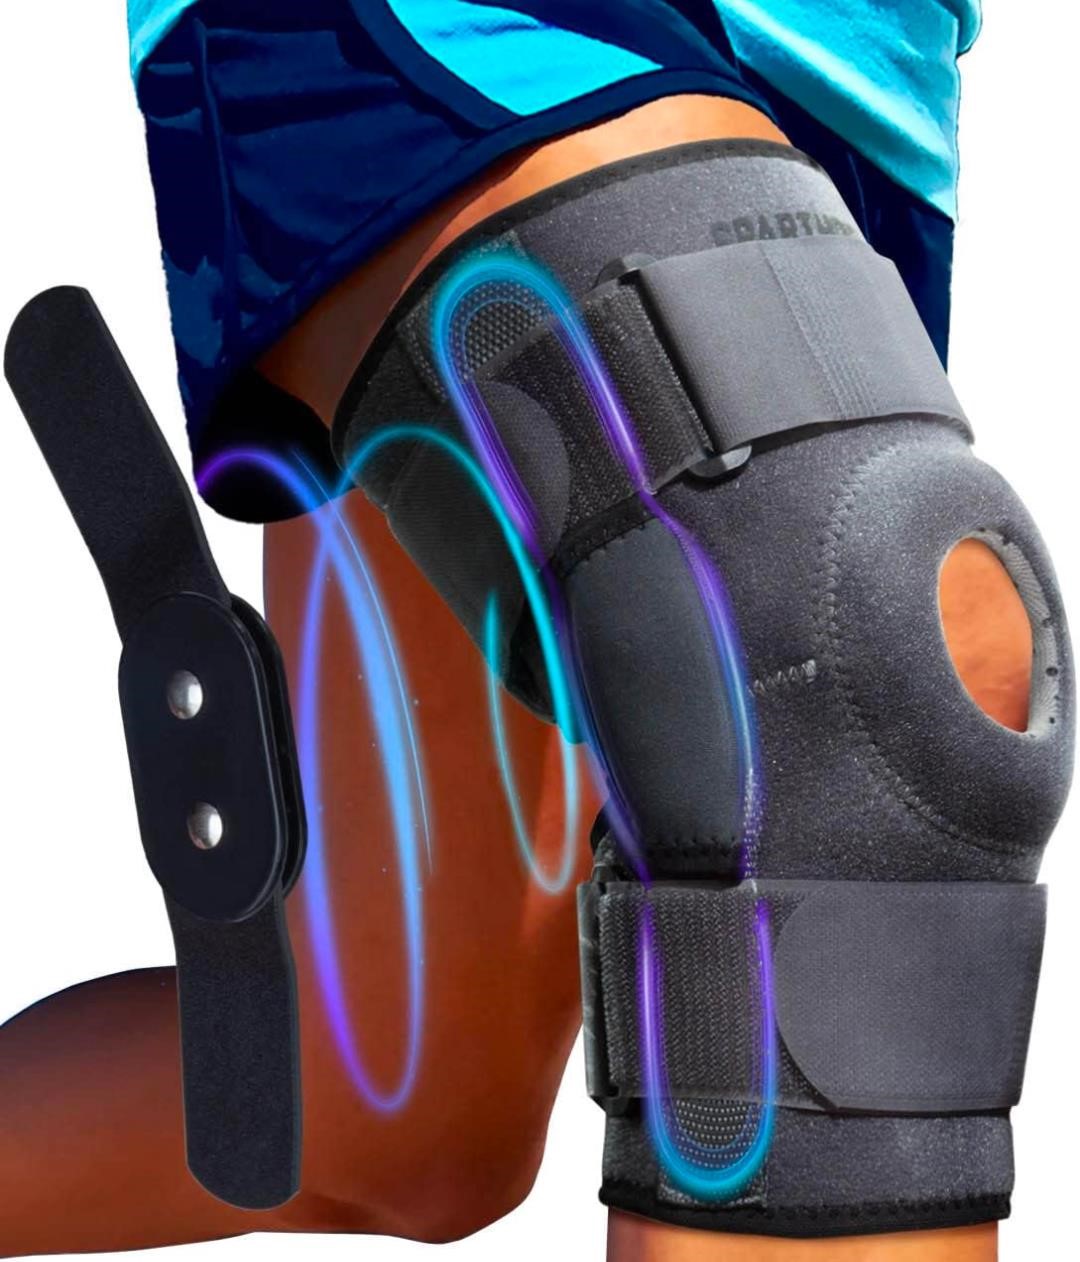 Sparthos Knee Brace - Relieves ACL, MCL, Meniscus